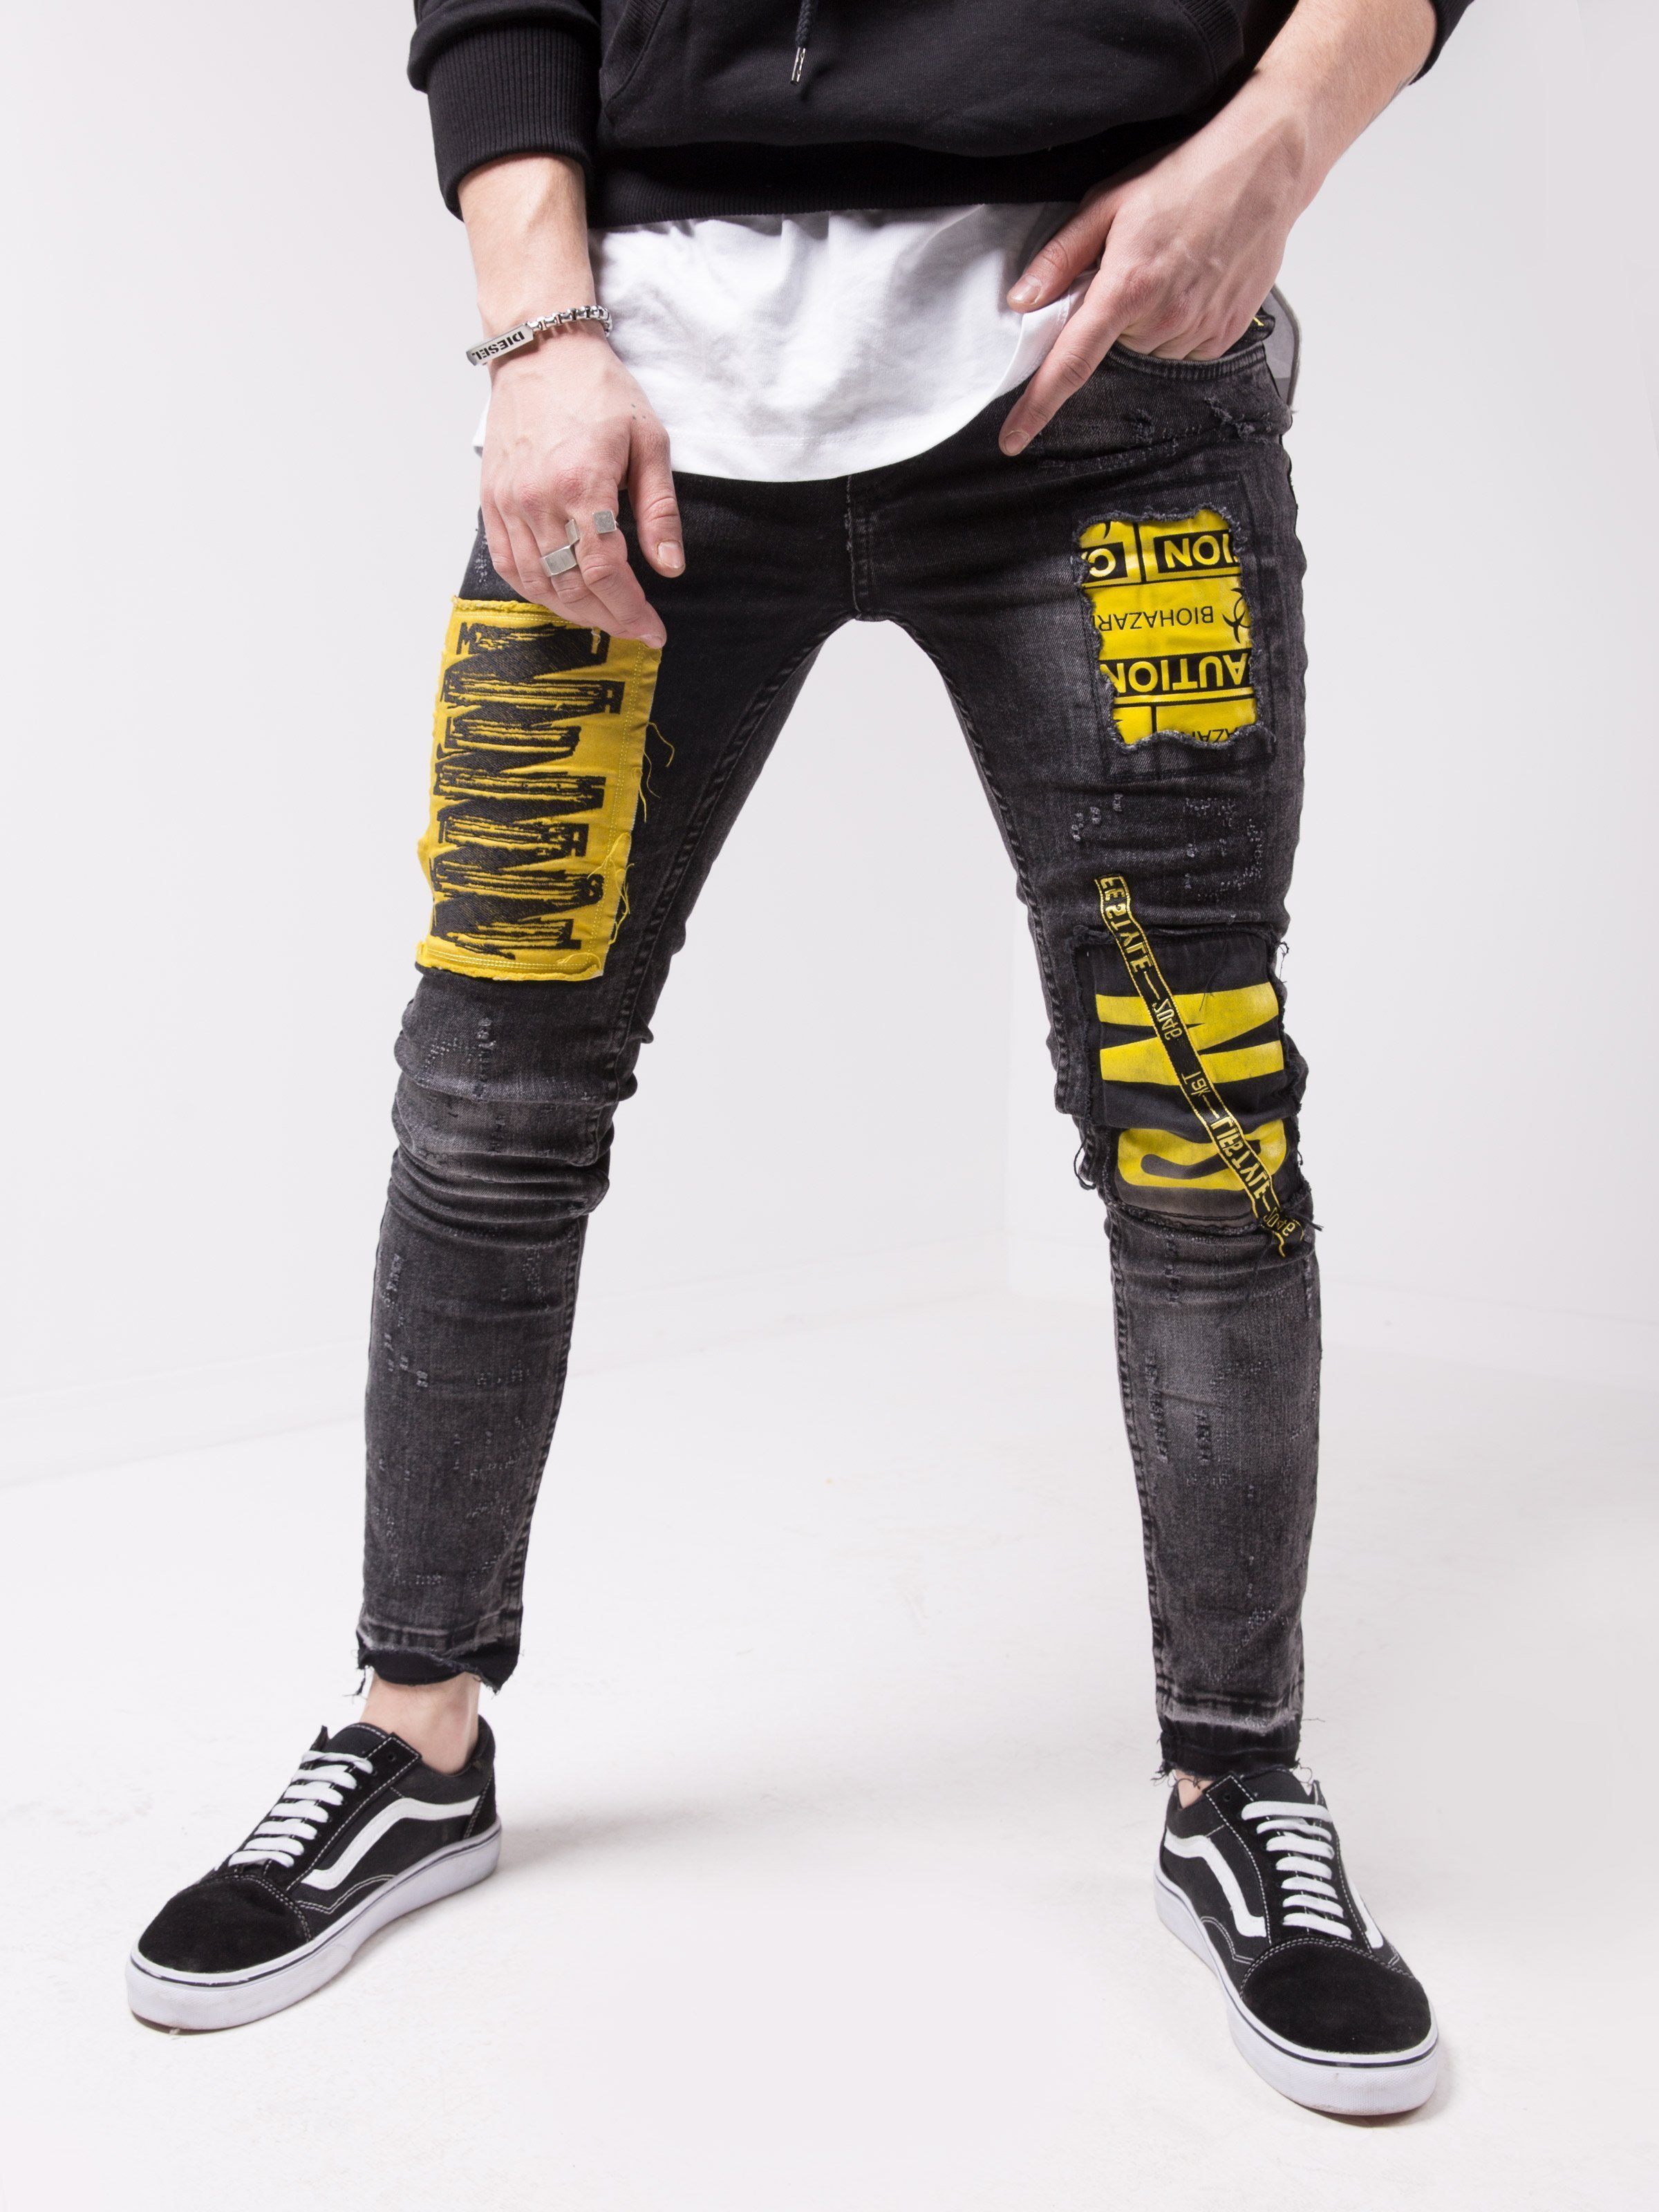 A man wearing a pair of MOUNT ONE jeans with yellow tape on them.